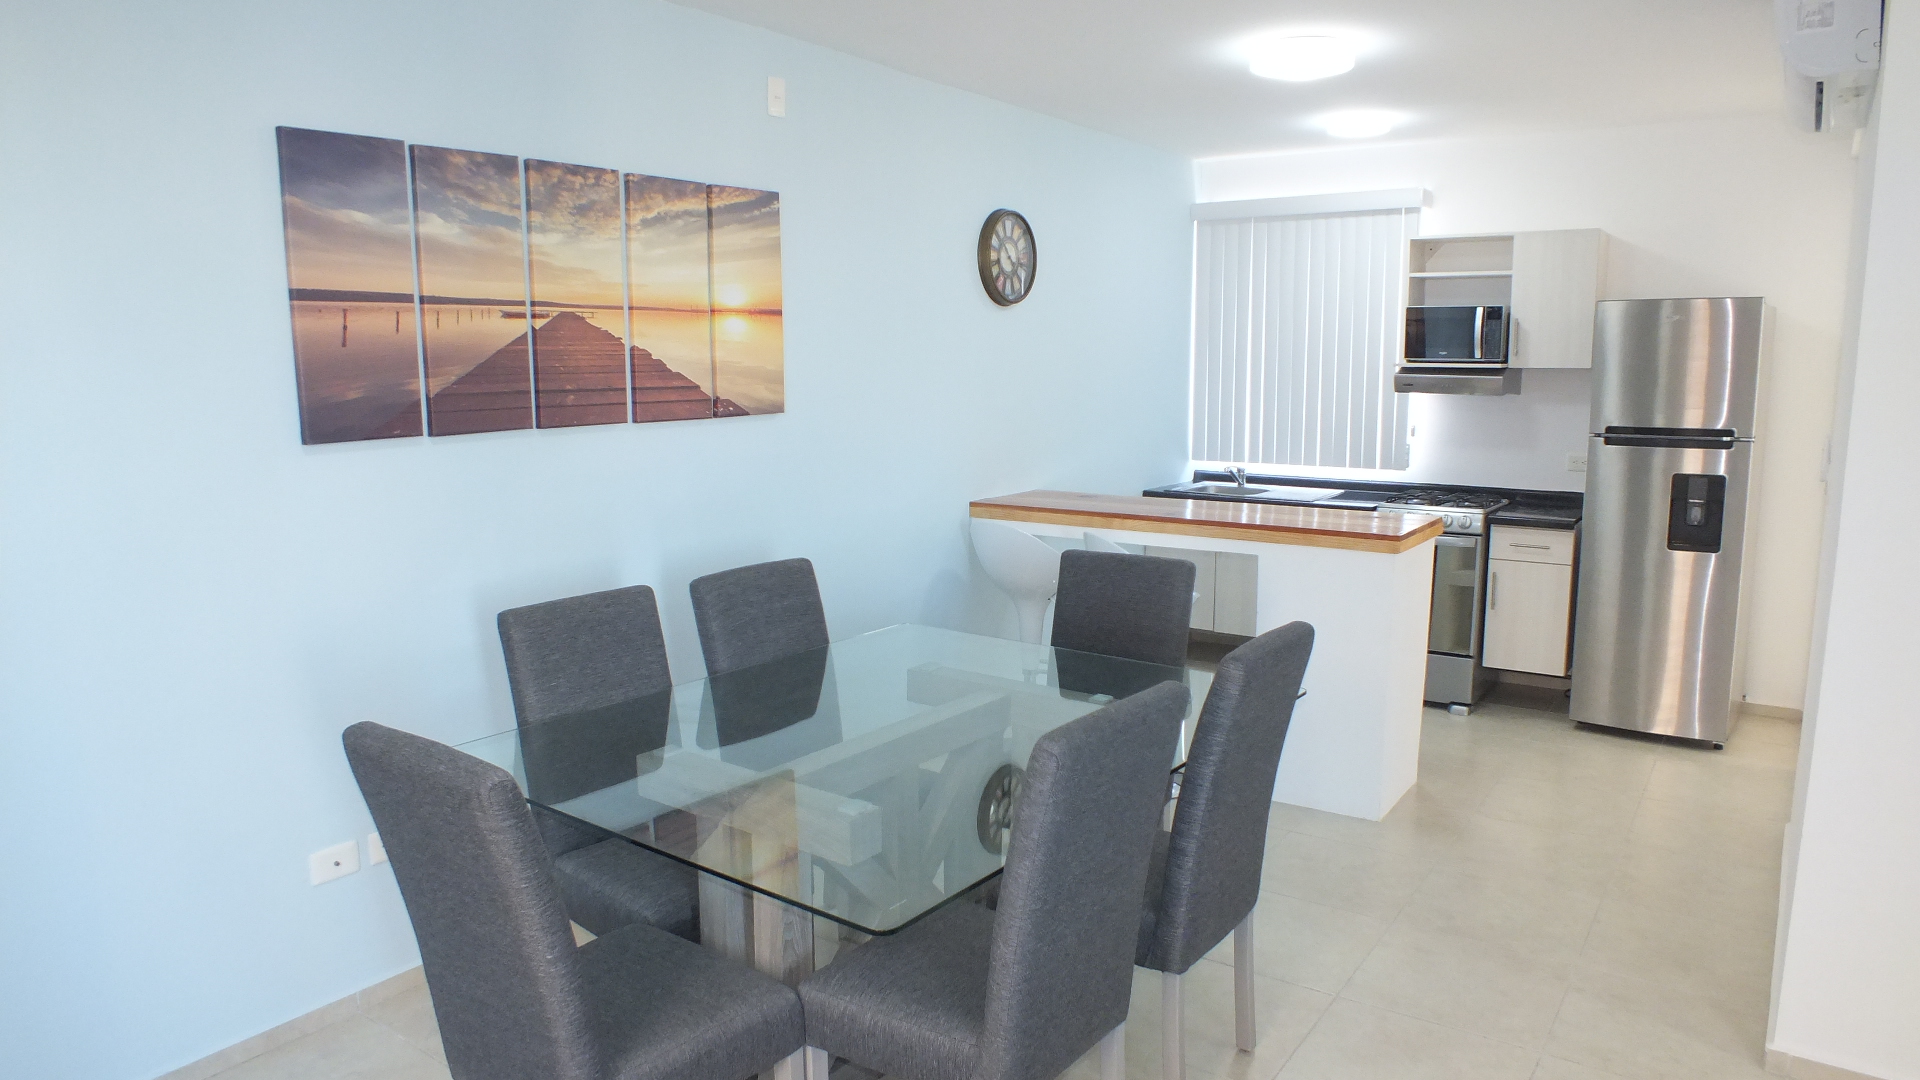 Kitchen and dining table with a breakfast bar at Punta Estrella